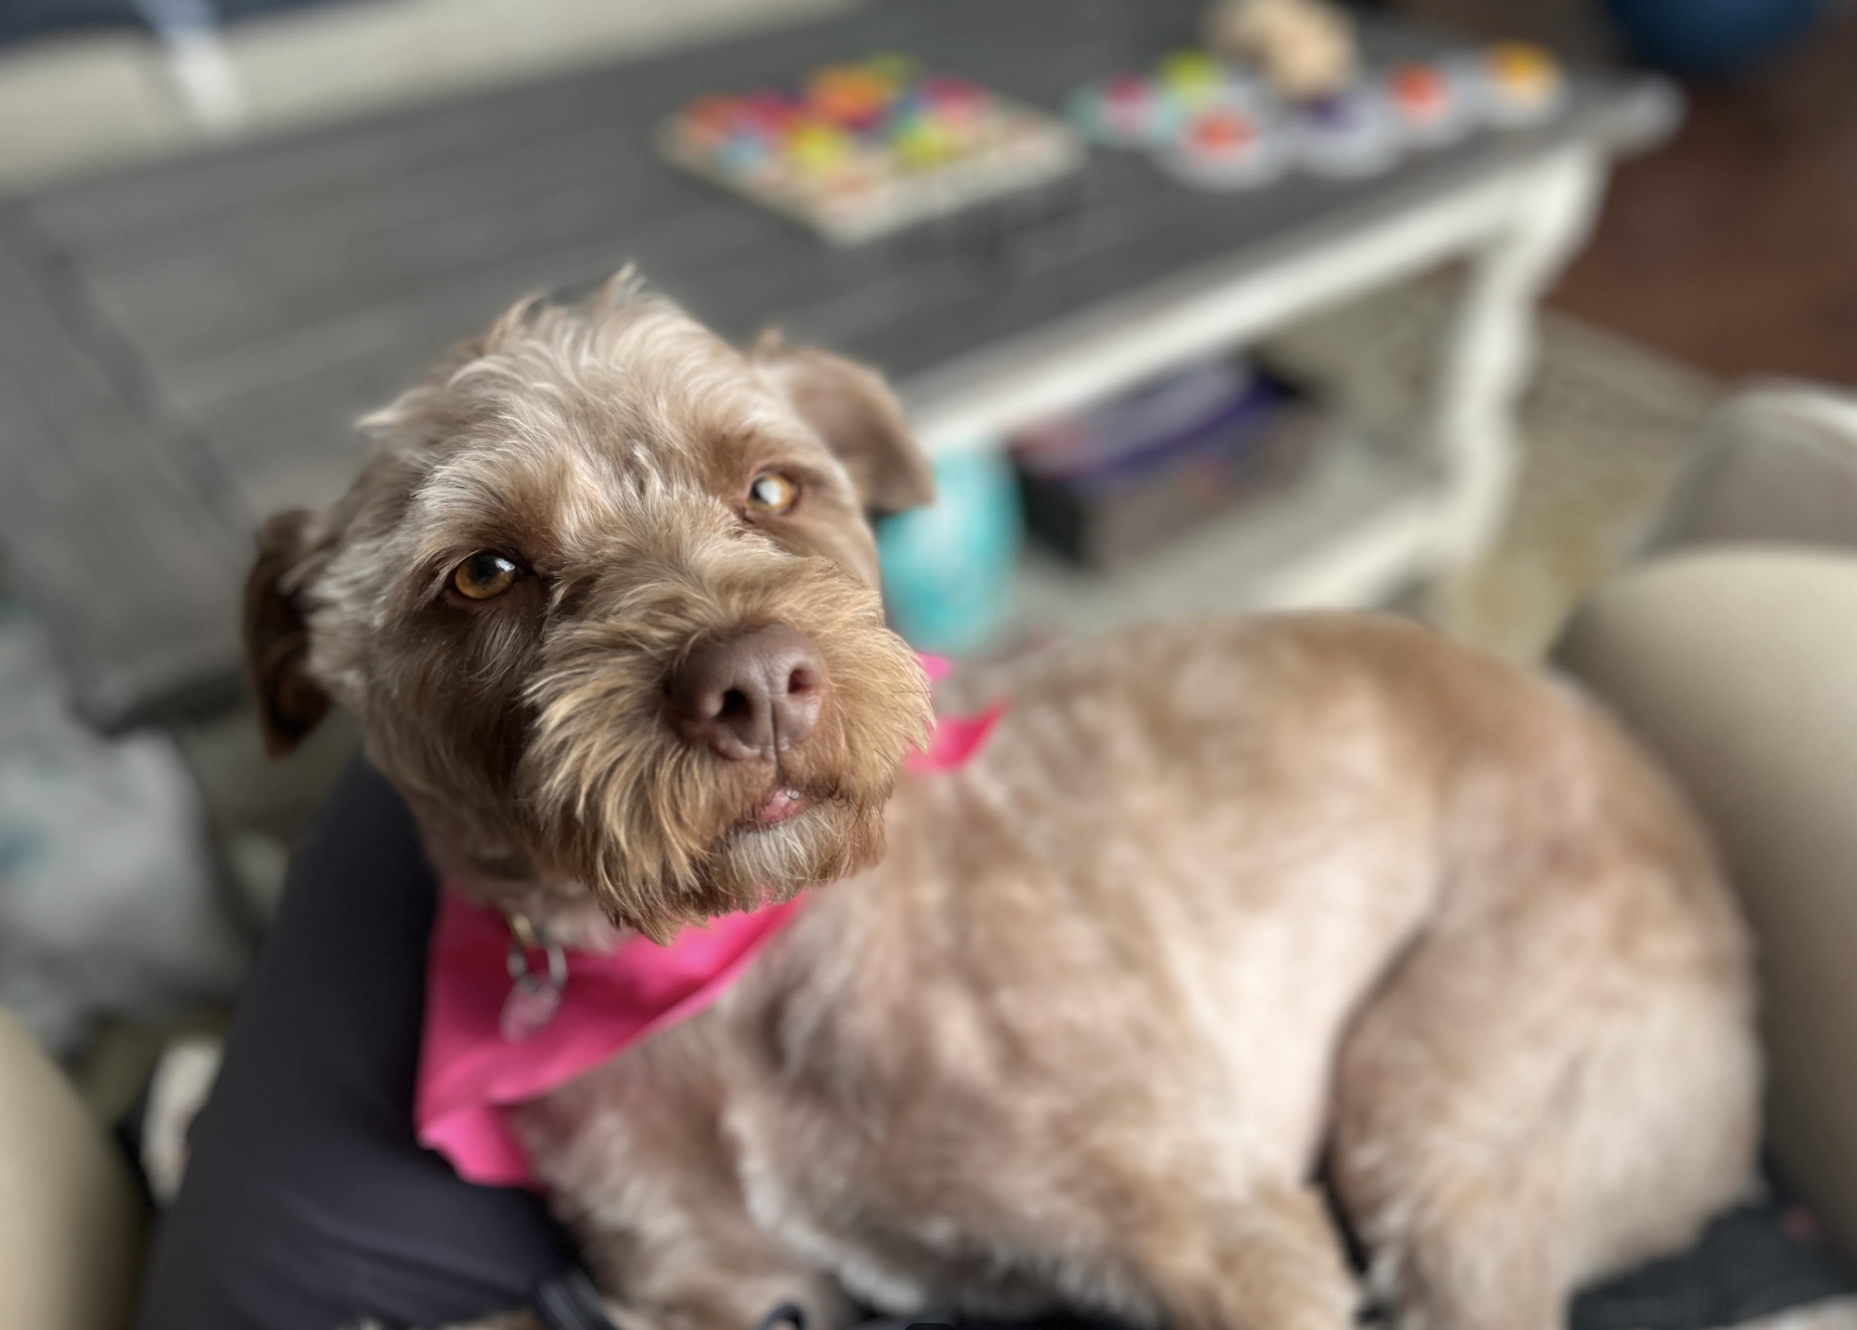 Dog with a pink bandana sitting indoors, looking up, with a blurred background of a table